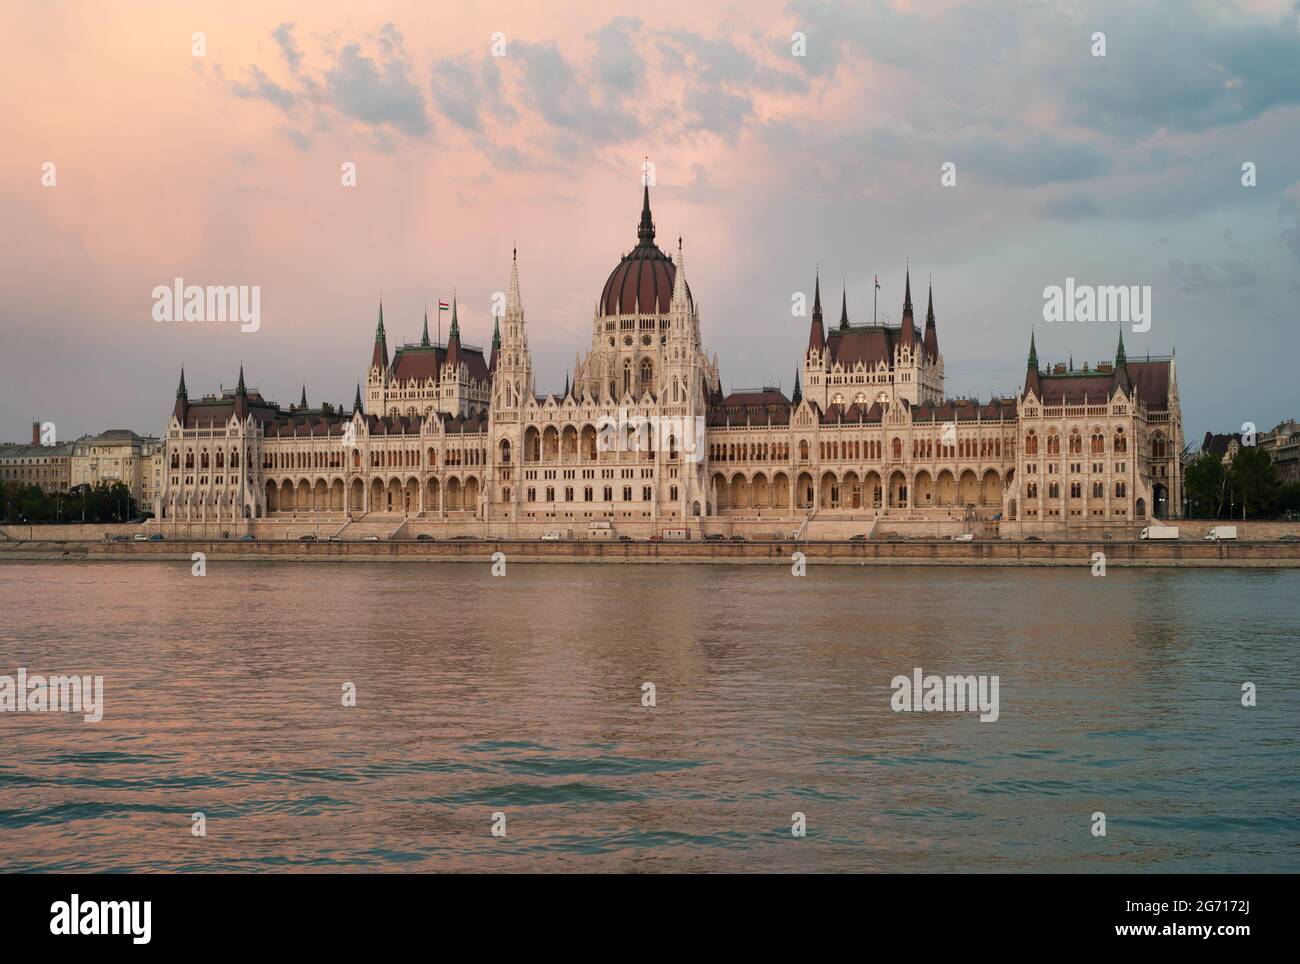 Hungarian House of Parliament Building in Budapest, Hungary, on the River Danube at Dusk in the Evening Stock Photo